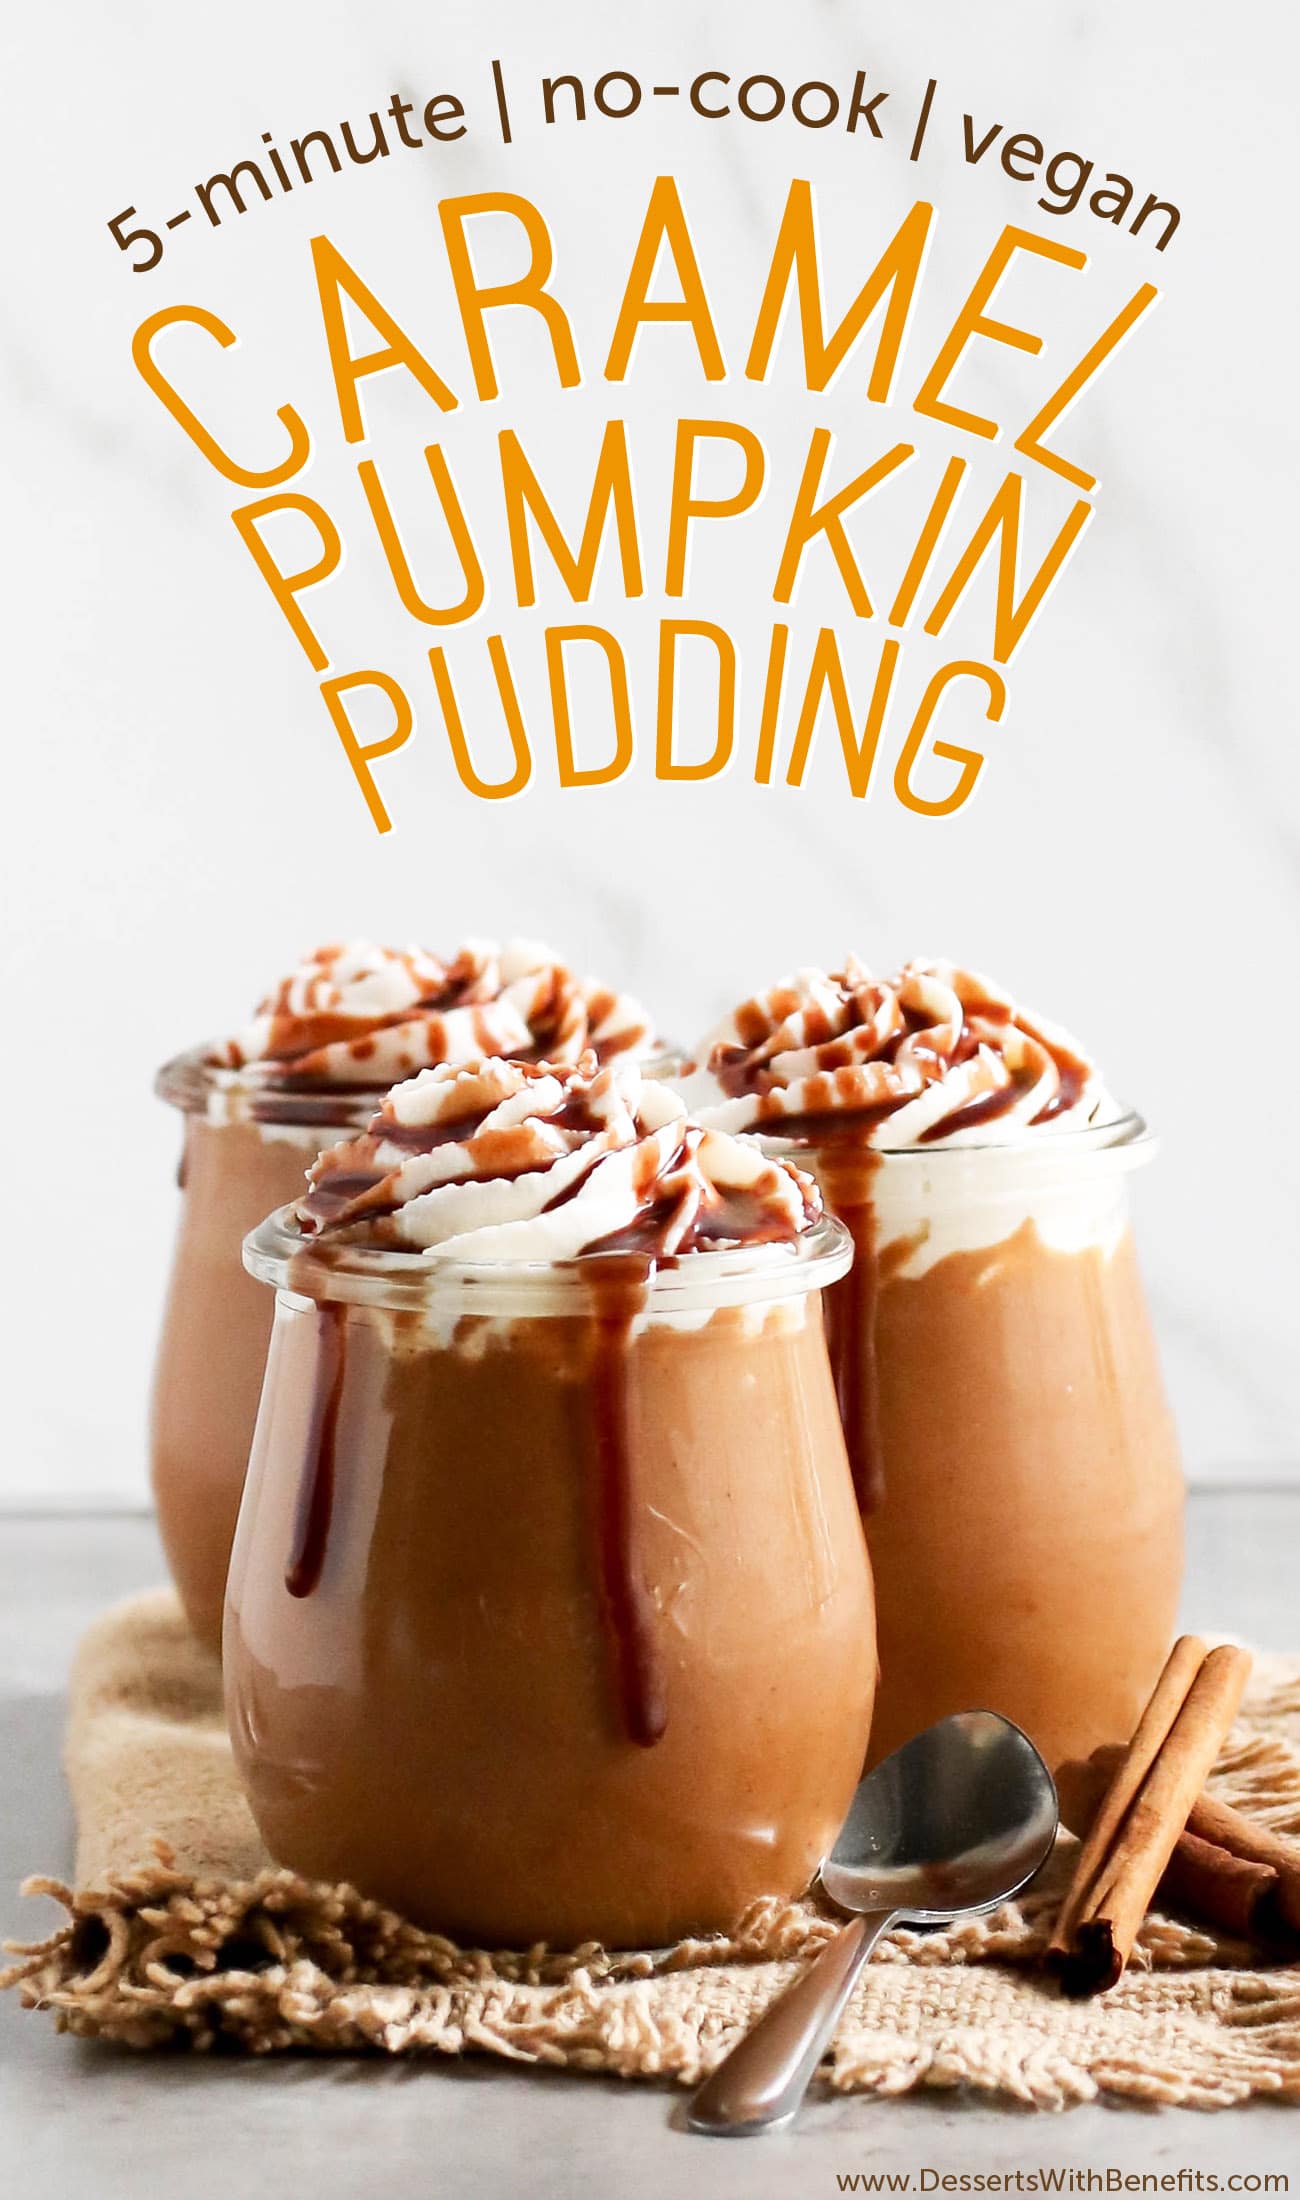 This 5-minute Healthy Caramel Pumpkin Pudding is sweet, creamy and packed full of pumpkin and caramel flavor. Best of all, it doesn't require any cooking, is refined sugar free, low fat, eggless, gluten free, and vegan too!